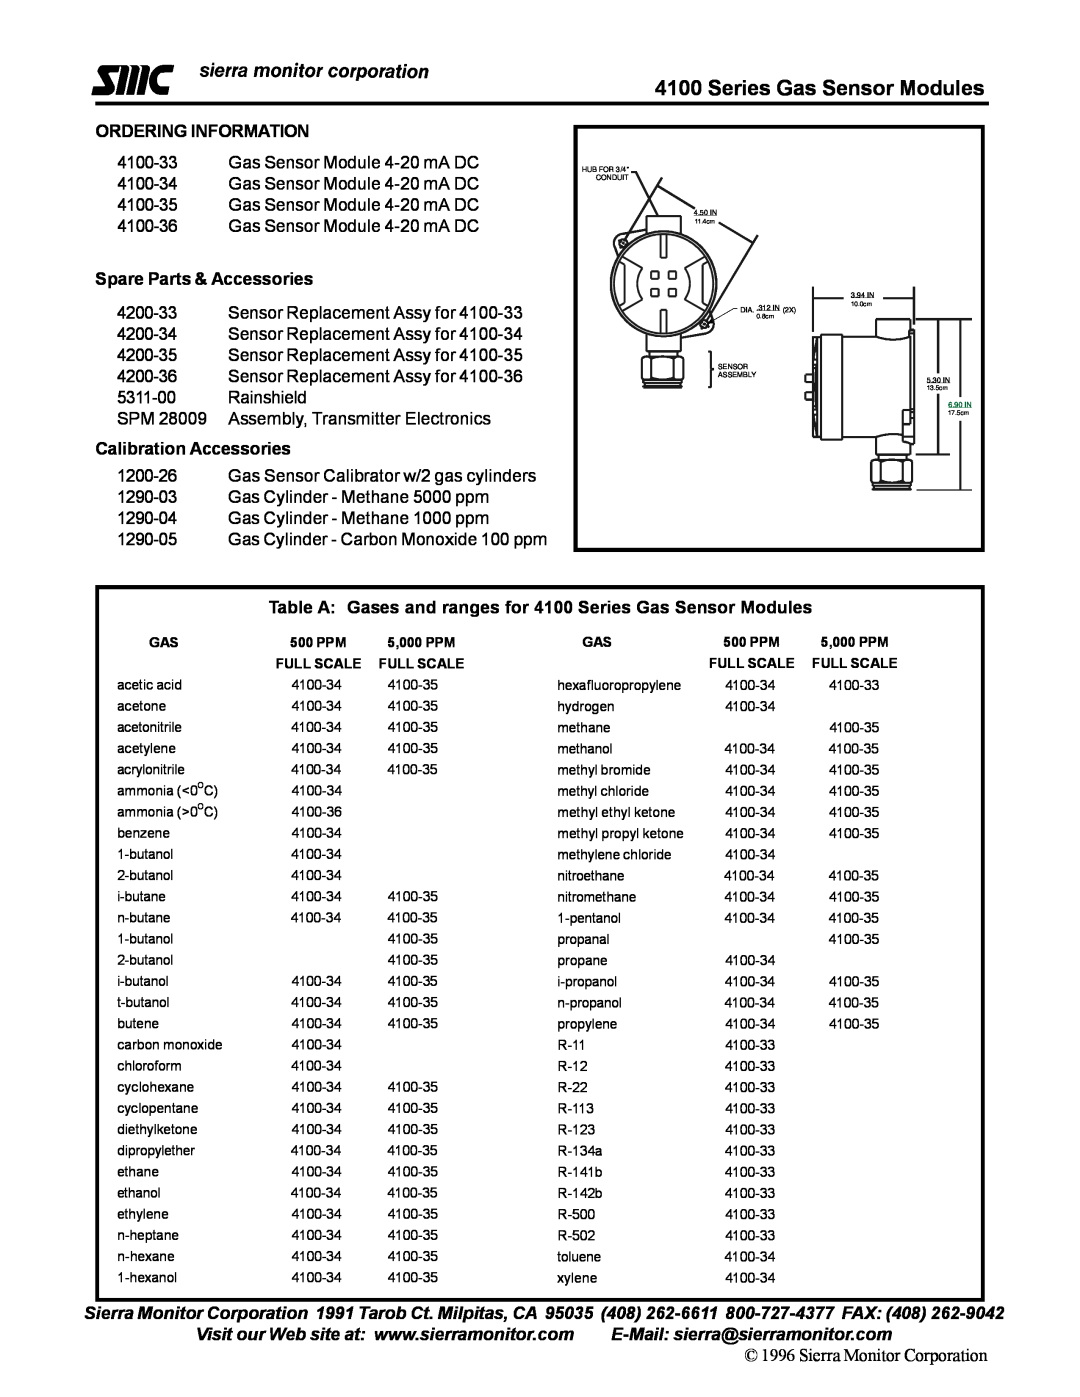 Sierra Monitor Corporation 4100-34, 4100-36 Series Gas Sensor Modules, Ordering Information, Spare Parts & Accessories 